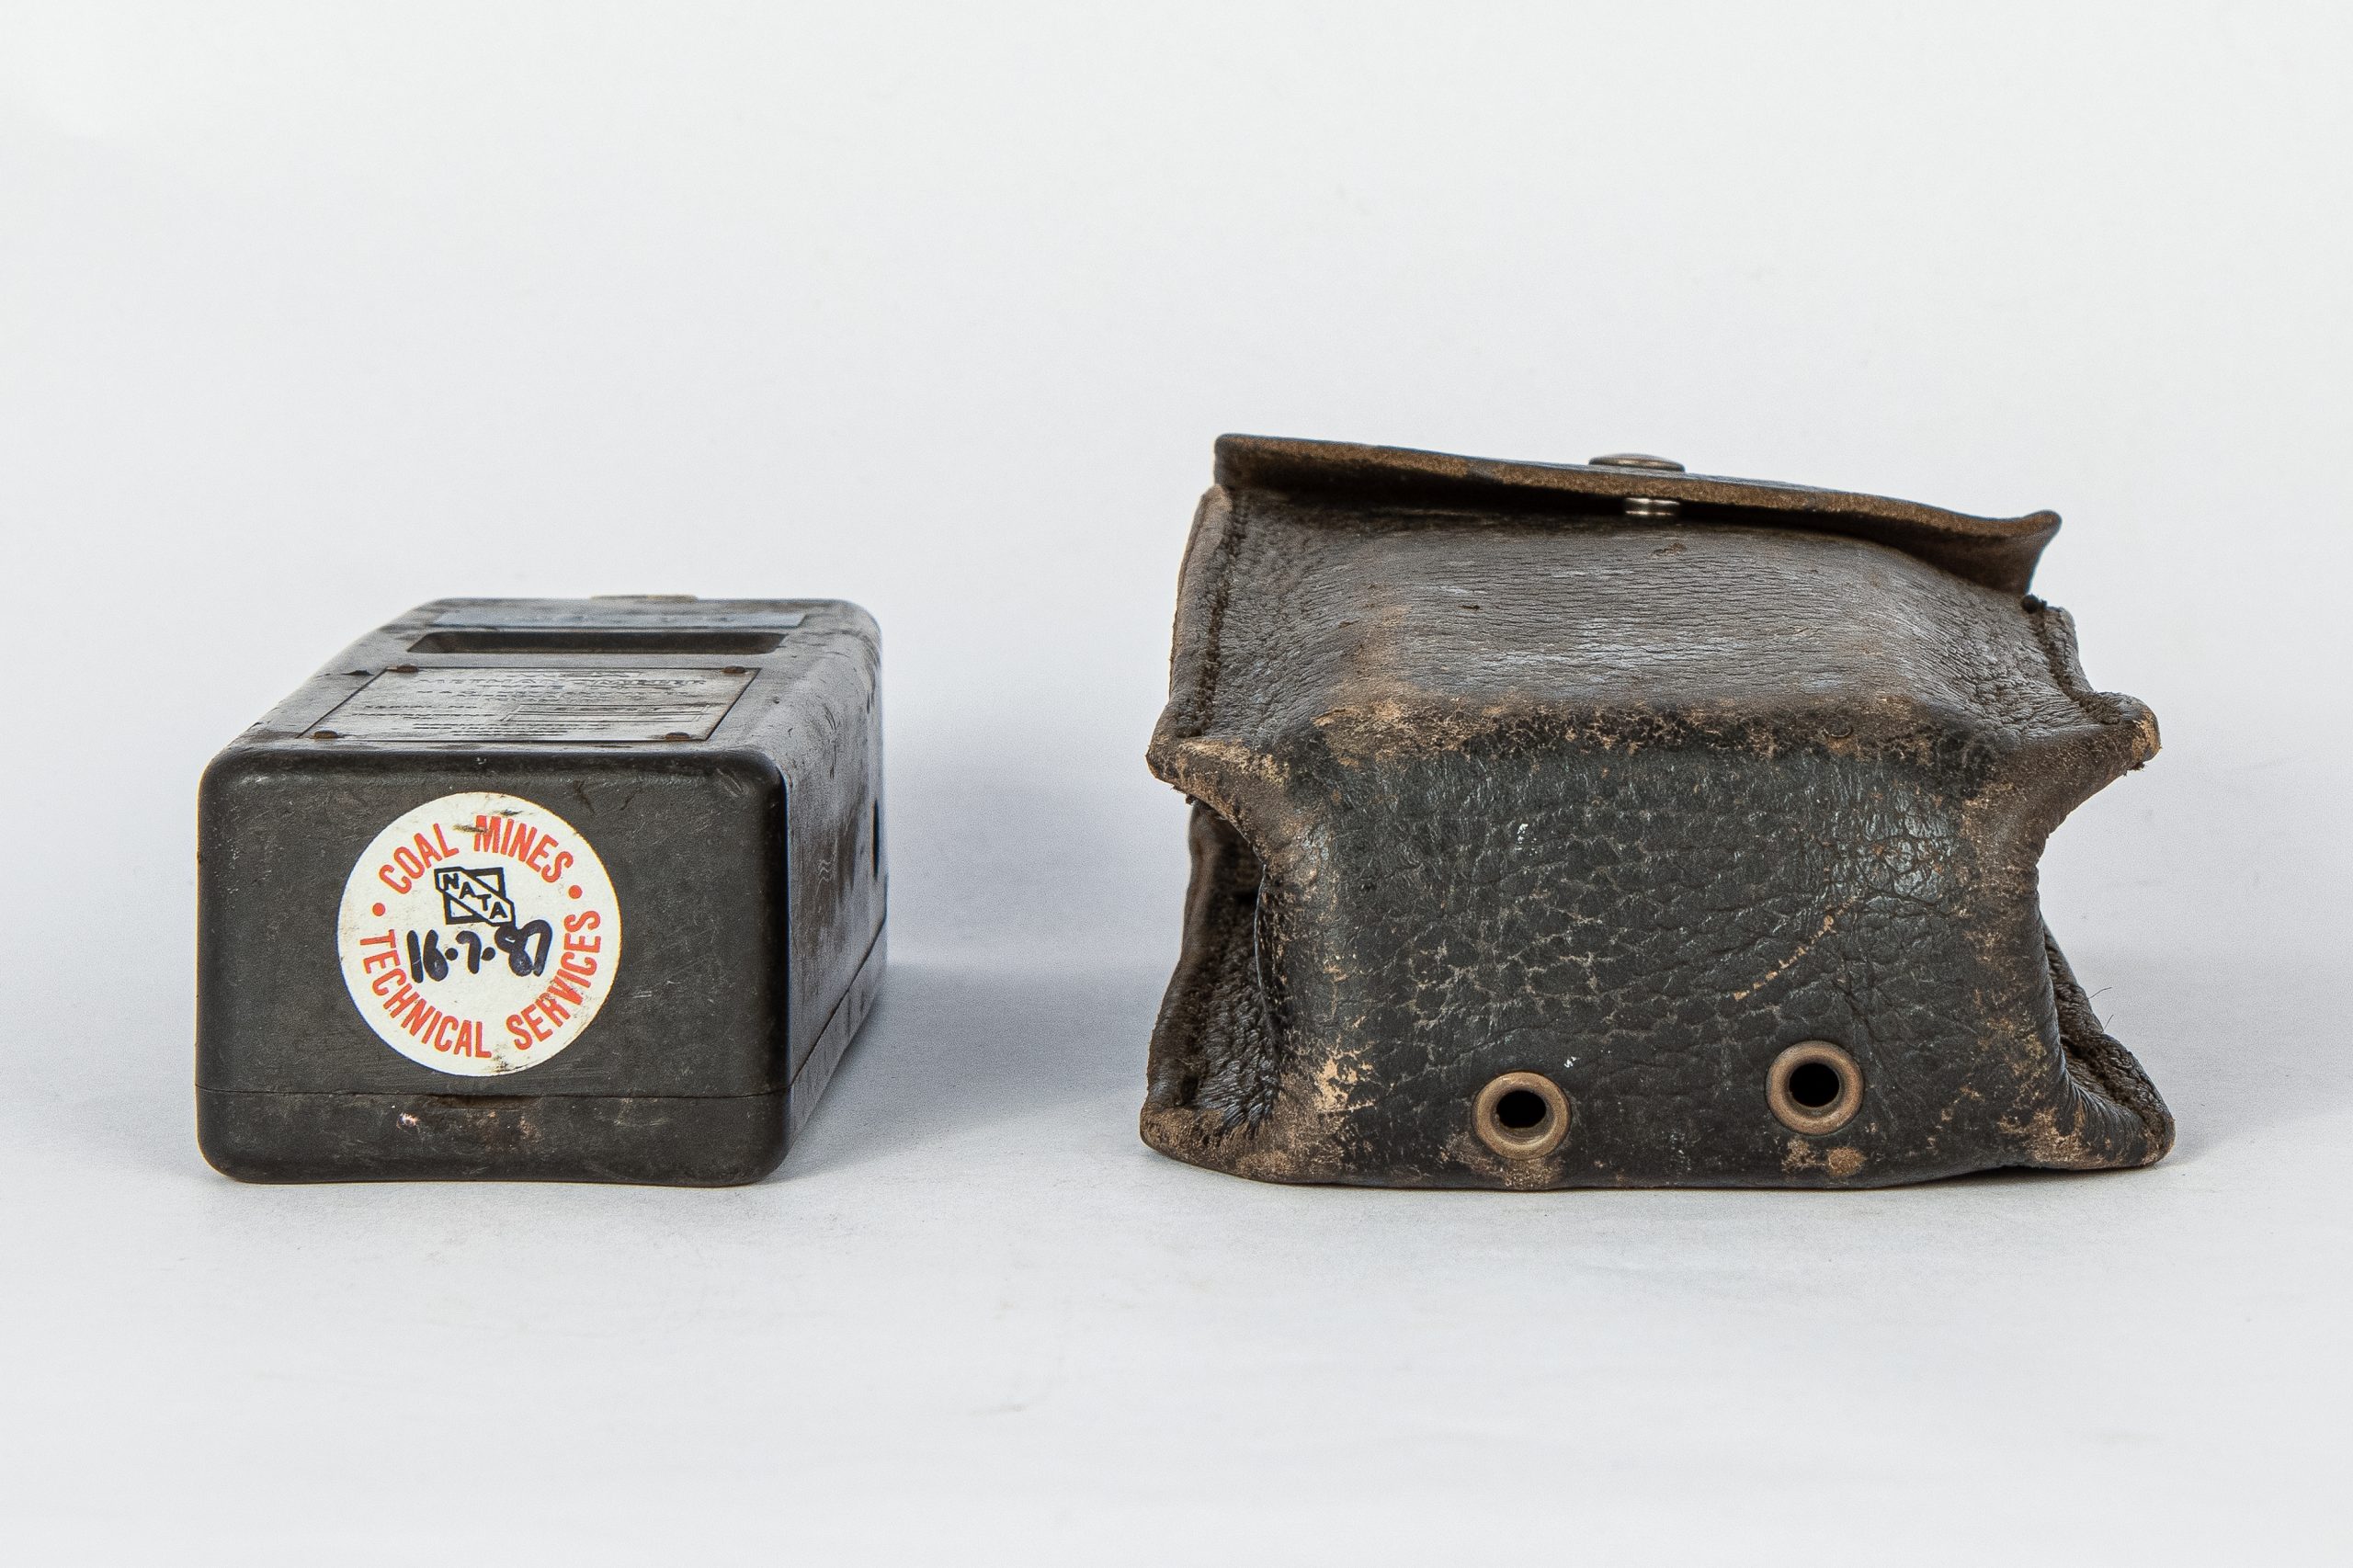 Bottom of device shaped like an old Nokia mobile phone. A sticker on the bottom reads, "COAL MINES TECHNICAL SERVICES NATA 16-7-87." Beside it is a leather pouch to hold the device.